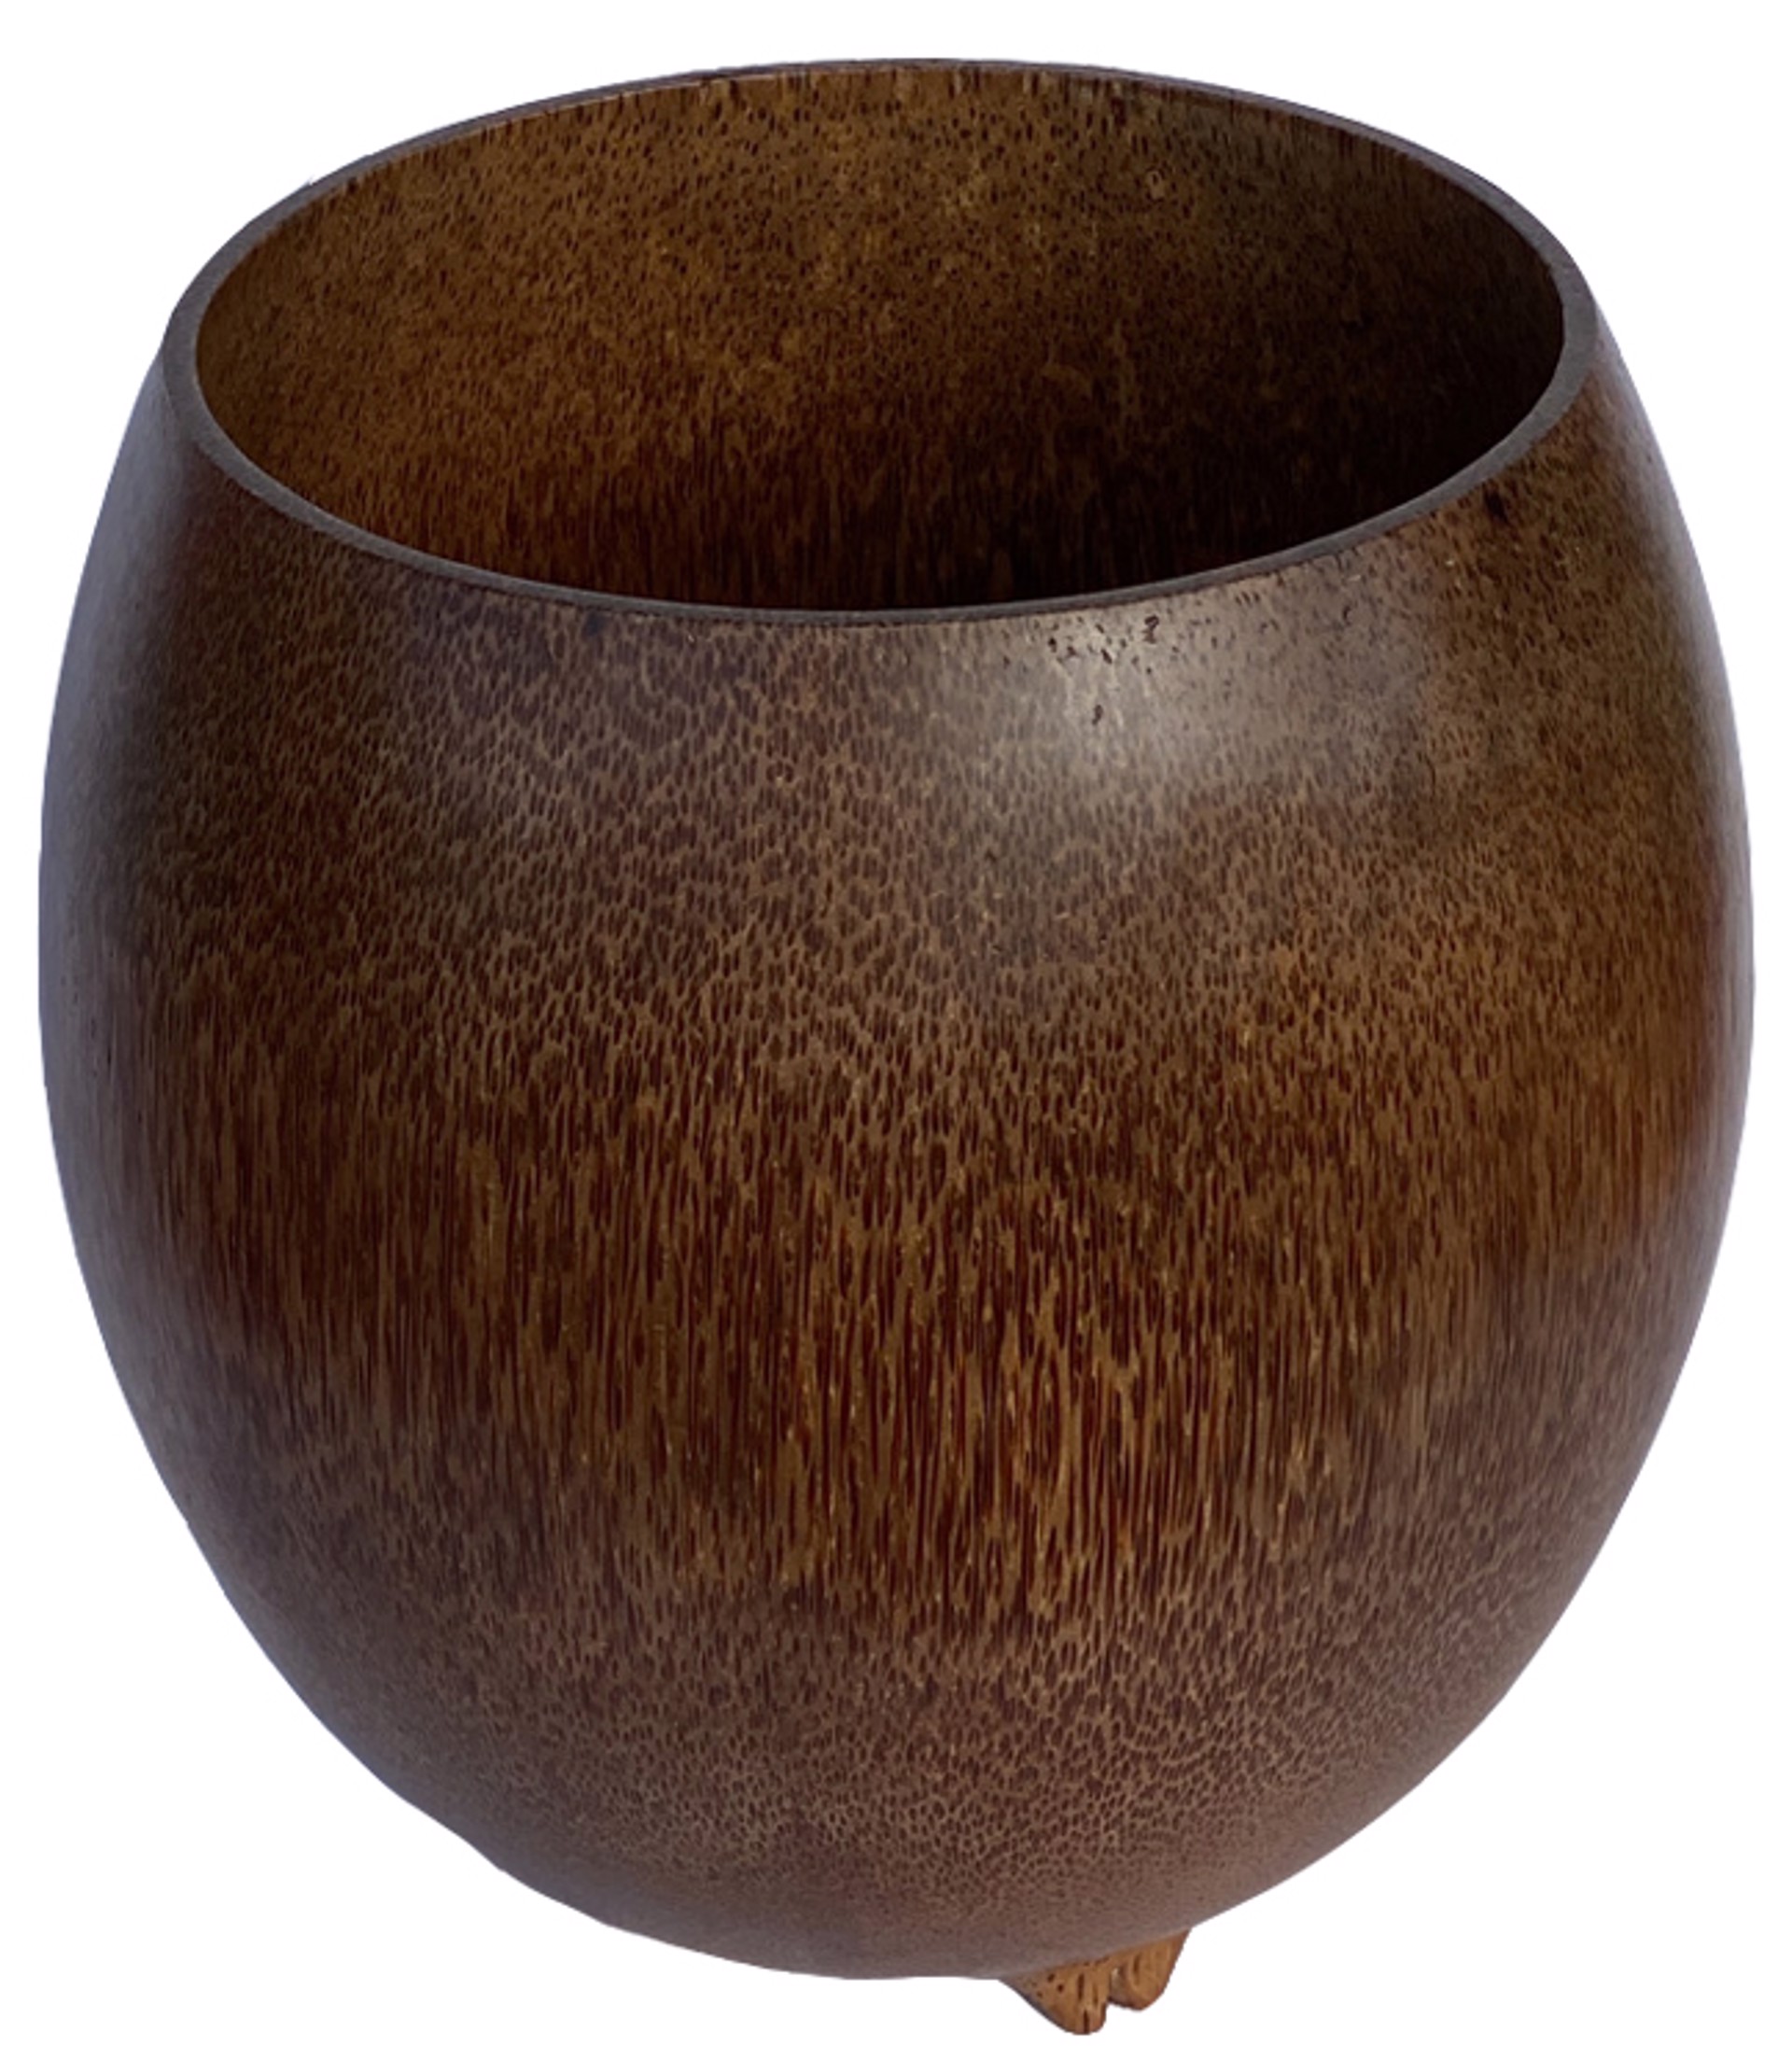 Brown Coconut Deep Bowl with Feet by John Fackrell